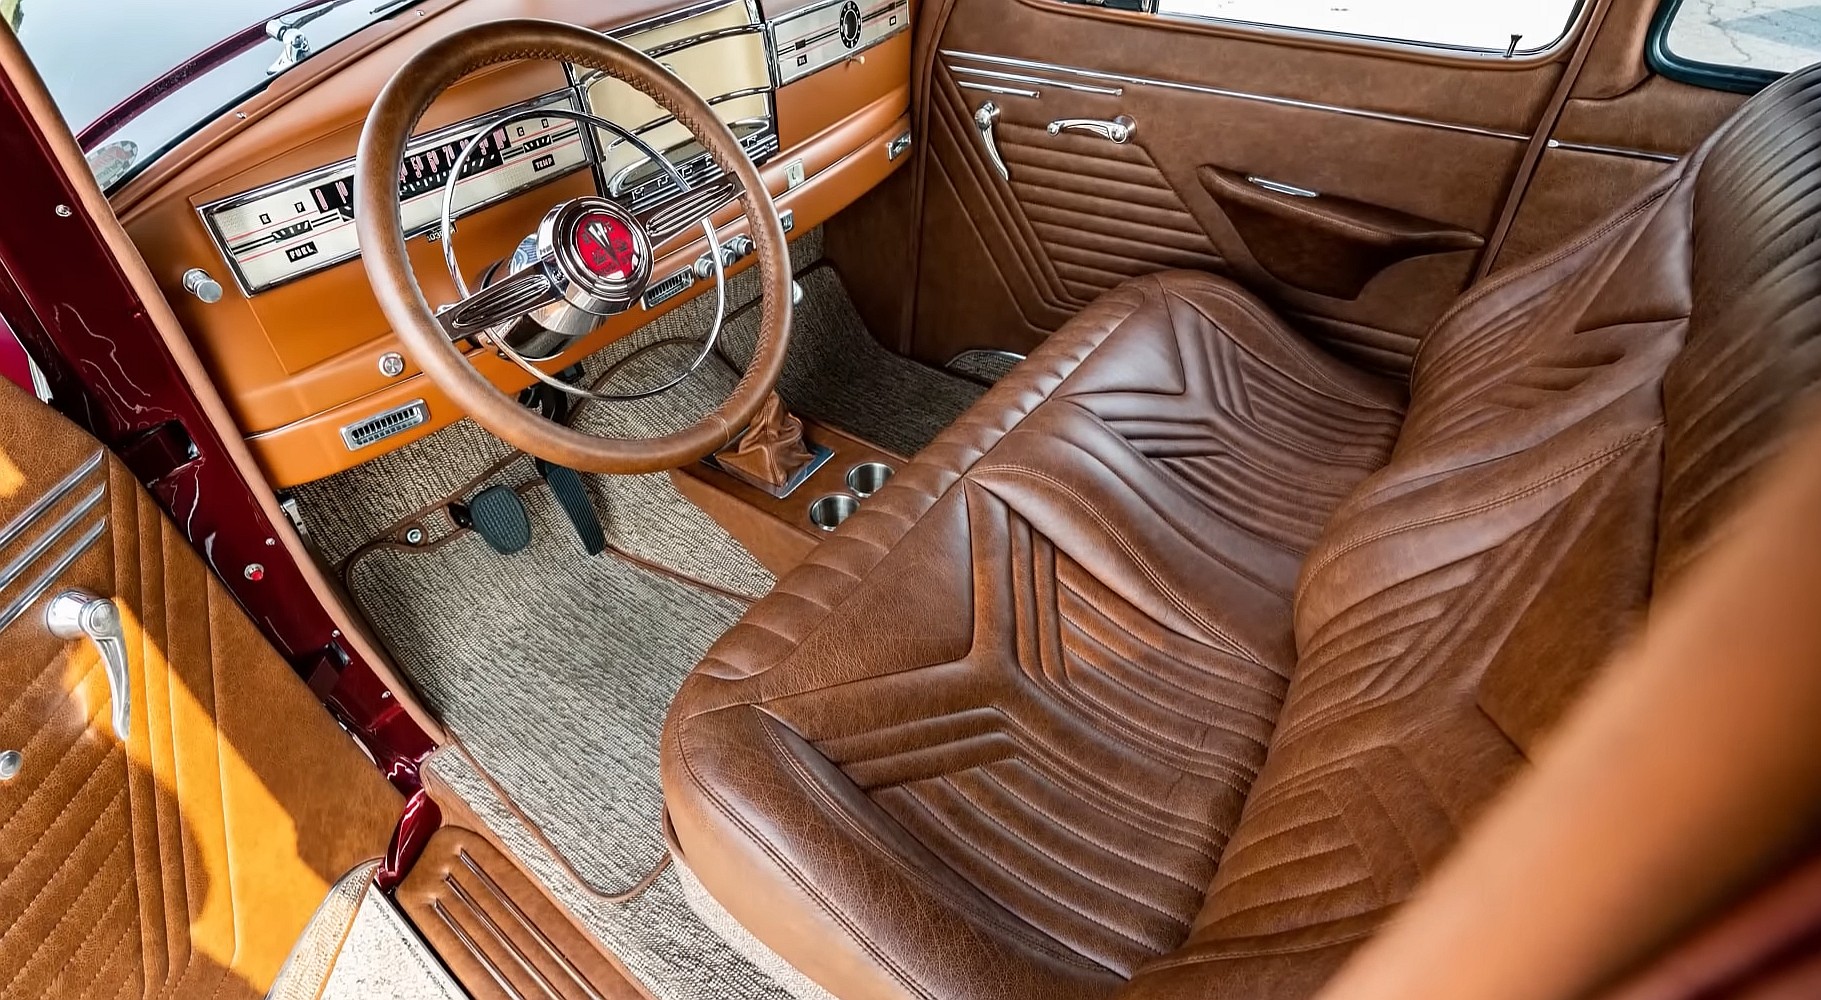 Once a Rust Bucket, This 1947 Hudson Super Six Is Now a HEMI-Powered Beauty  - autoevolution